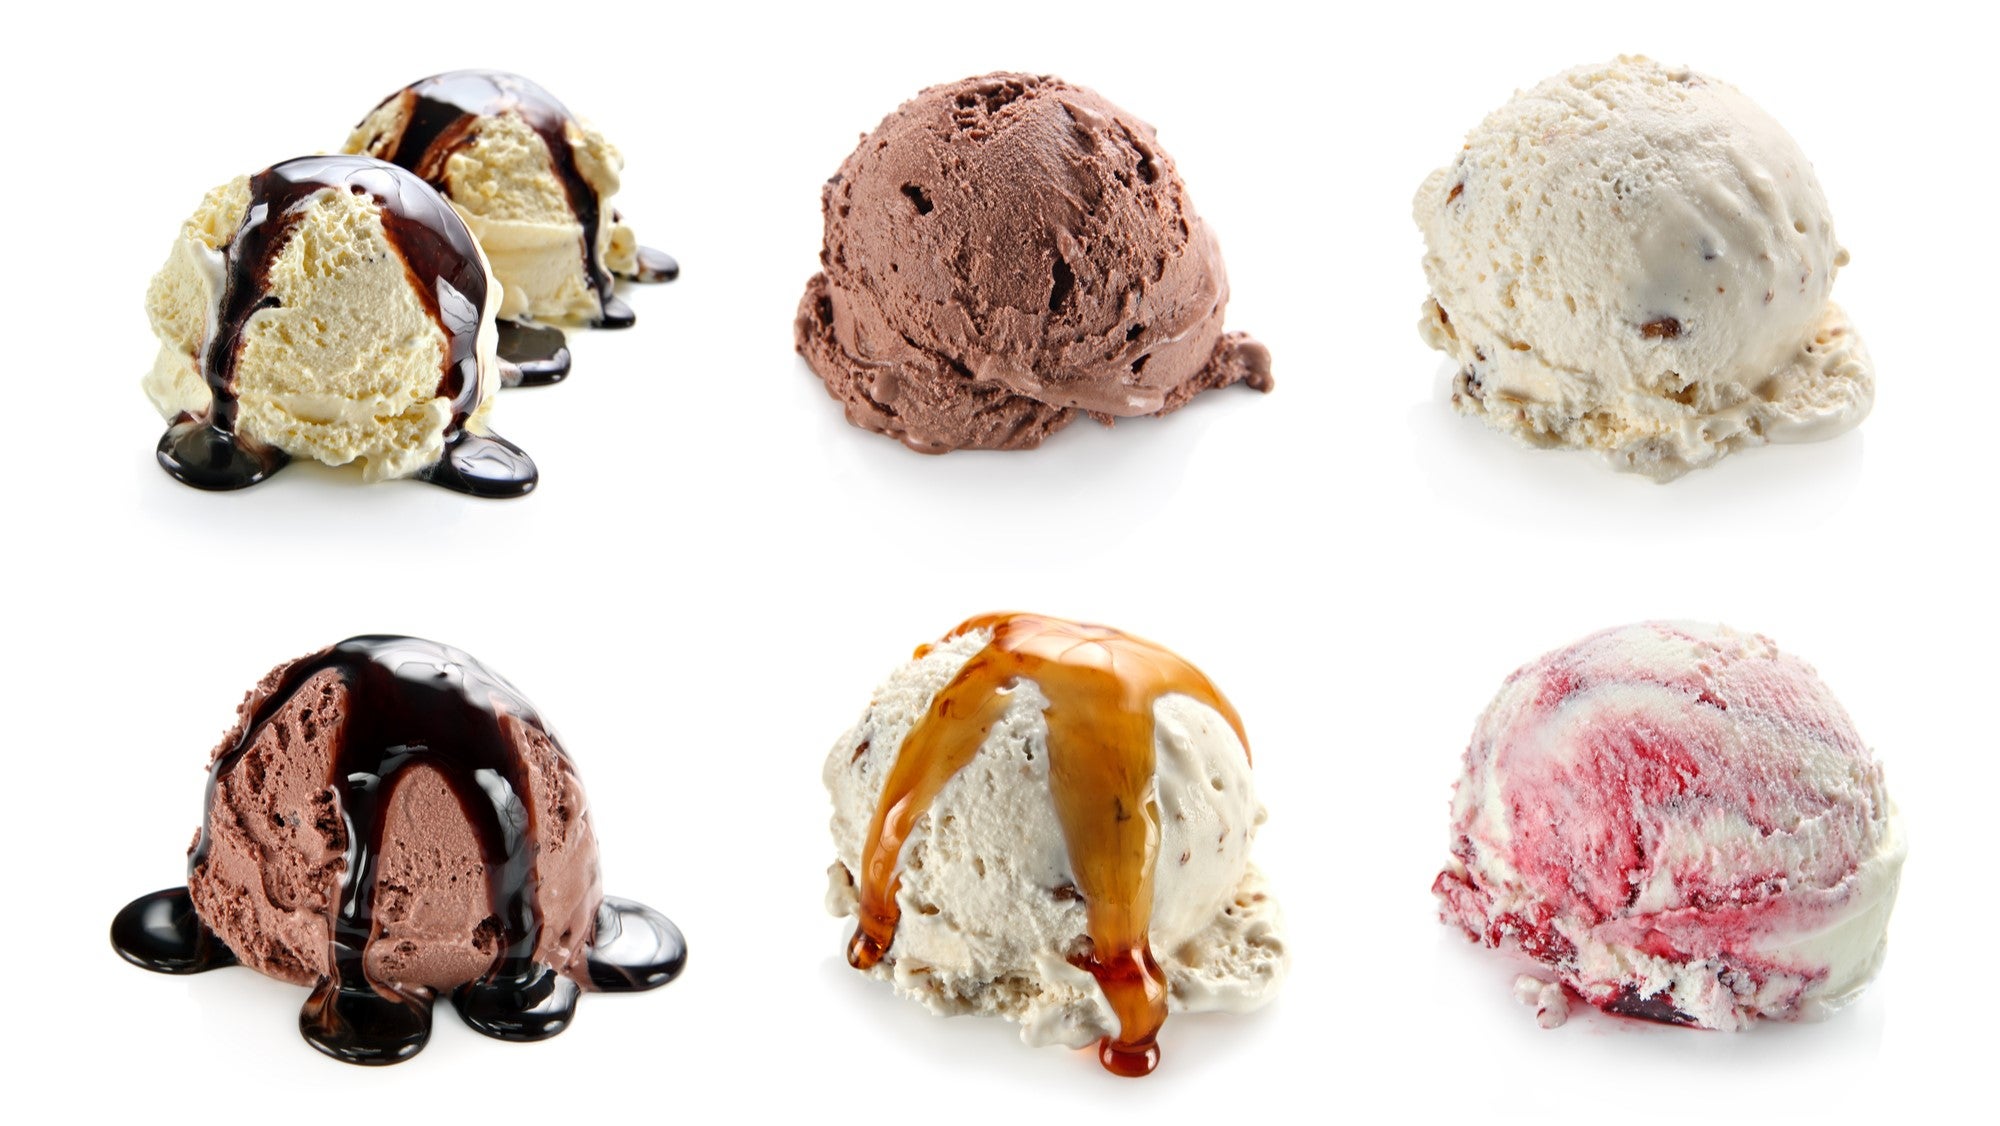 Here’s the scoop on how to choose a healthy ice cream thumbnail